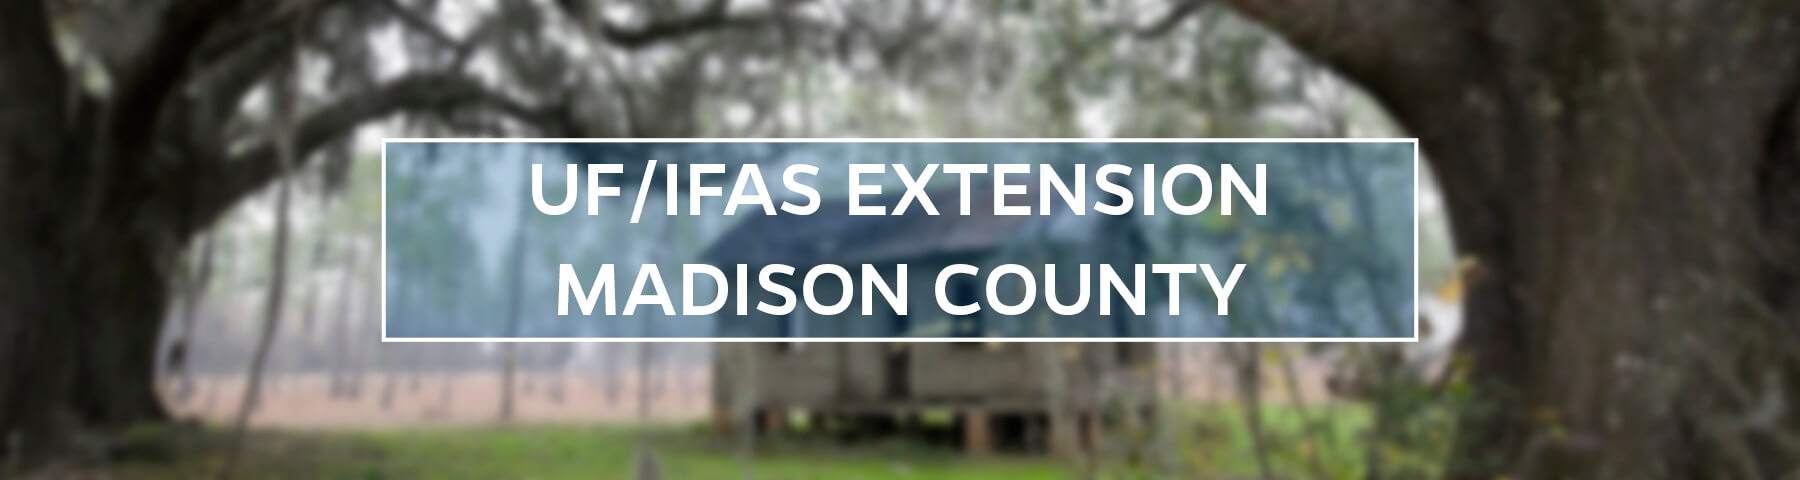 UF/IFAS Extension Madison County